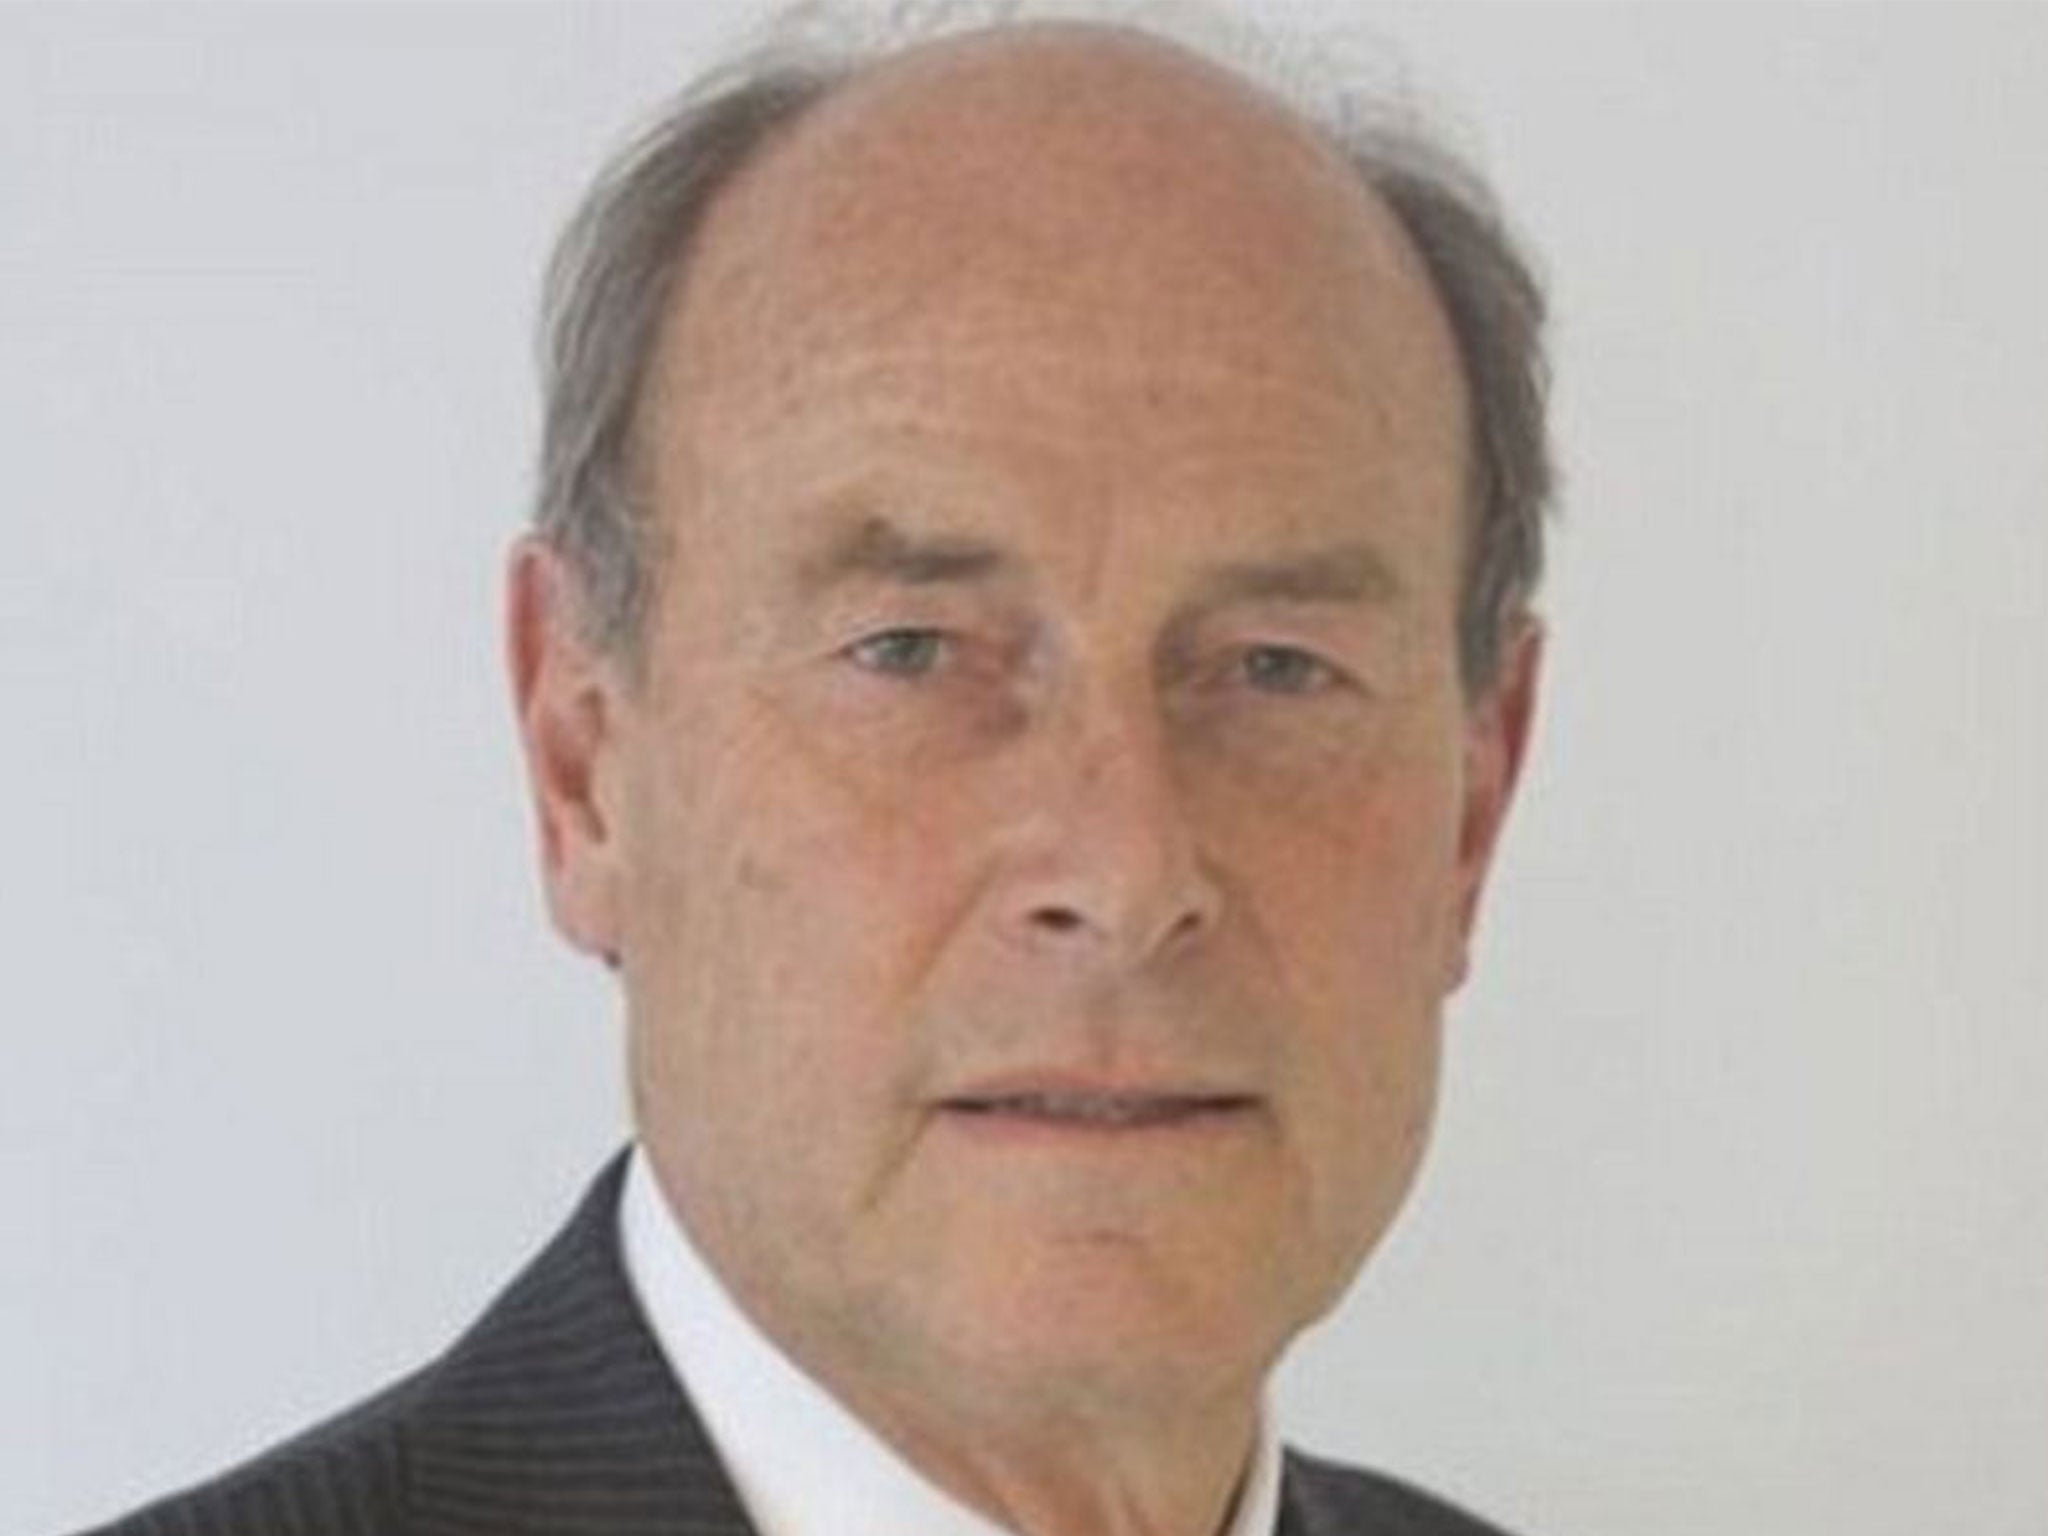 David Hoare, a former banker, was named chairman of Ofsted in 2014